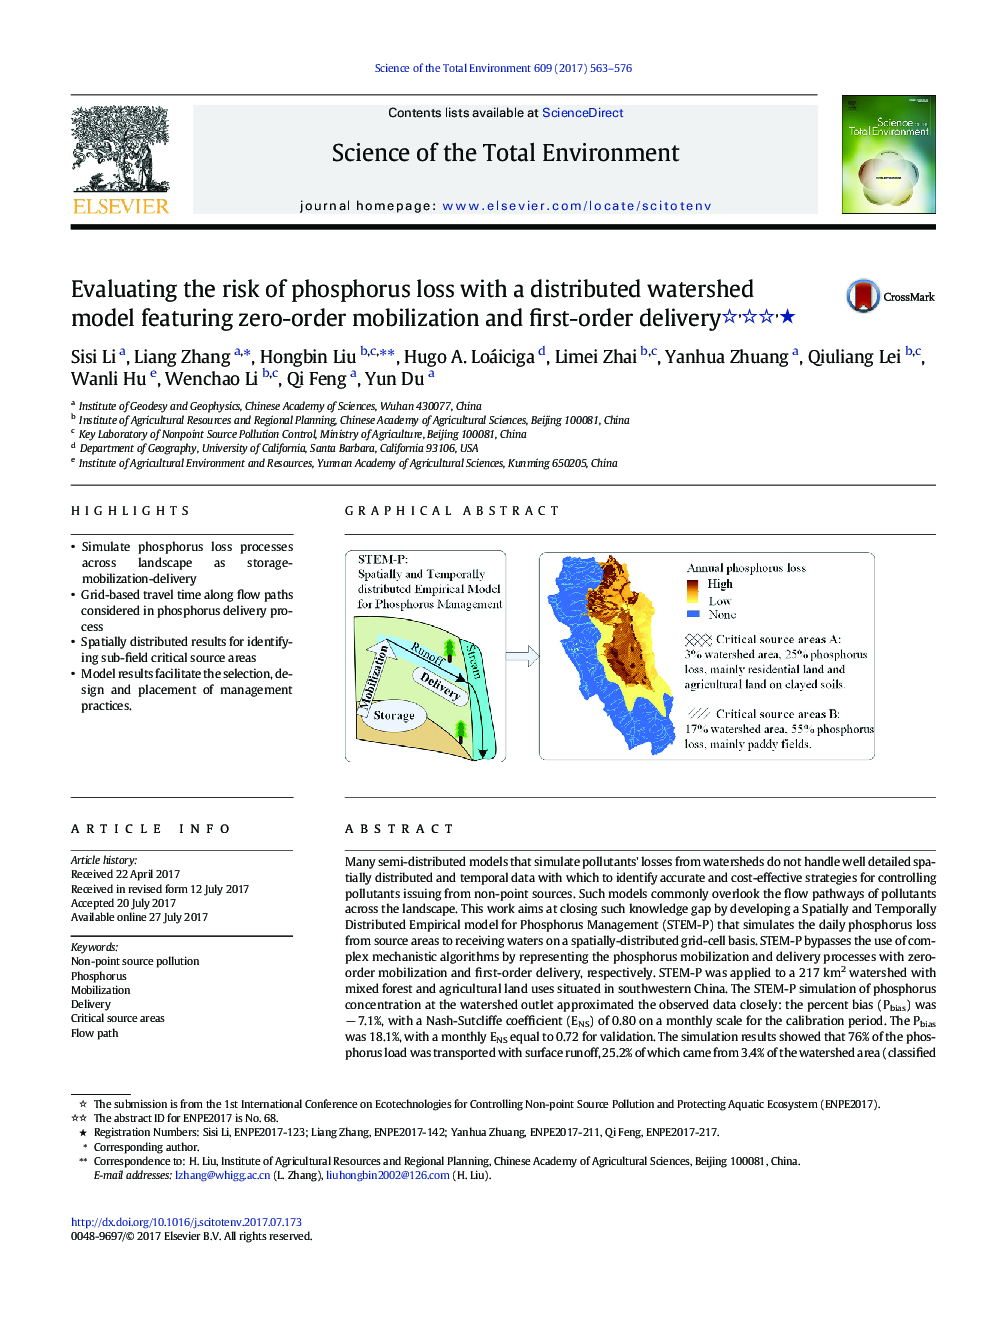 Evaluating the risk of phosphorus loss with a distributed watershed model featuring zero-order mobilization and first-order deliveryâ